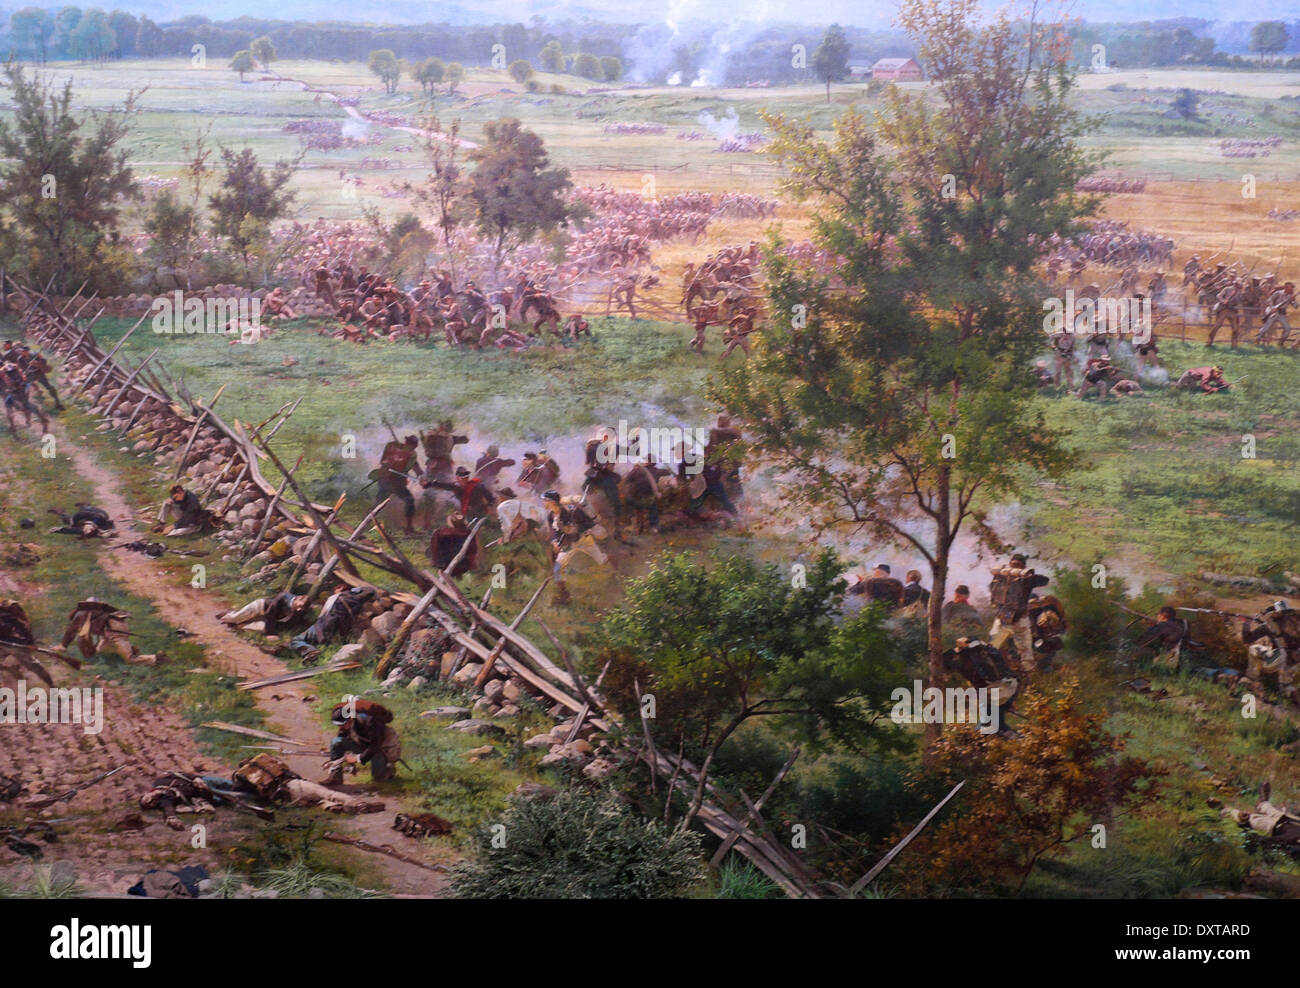 Battle of Gettysburg rages as Pickett's charge reaches the Union Lines, July 3rd 1863, USA Civil War Stock Photo